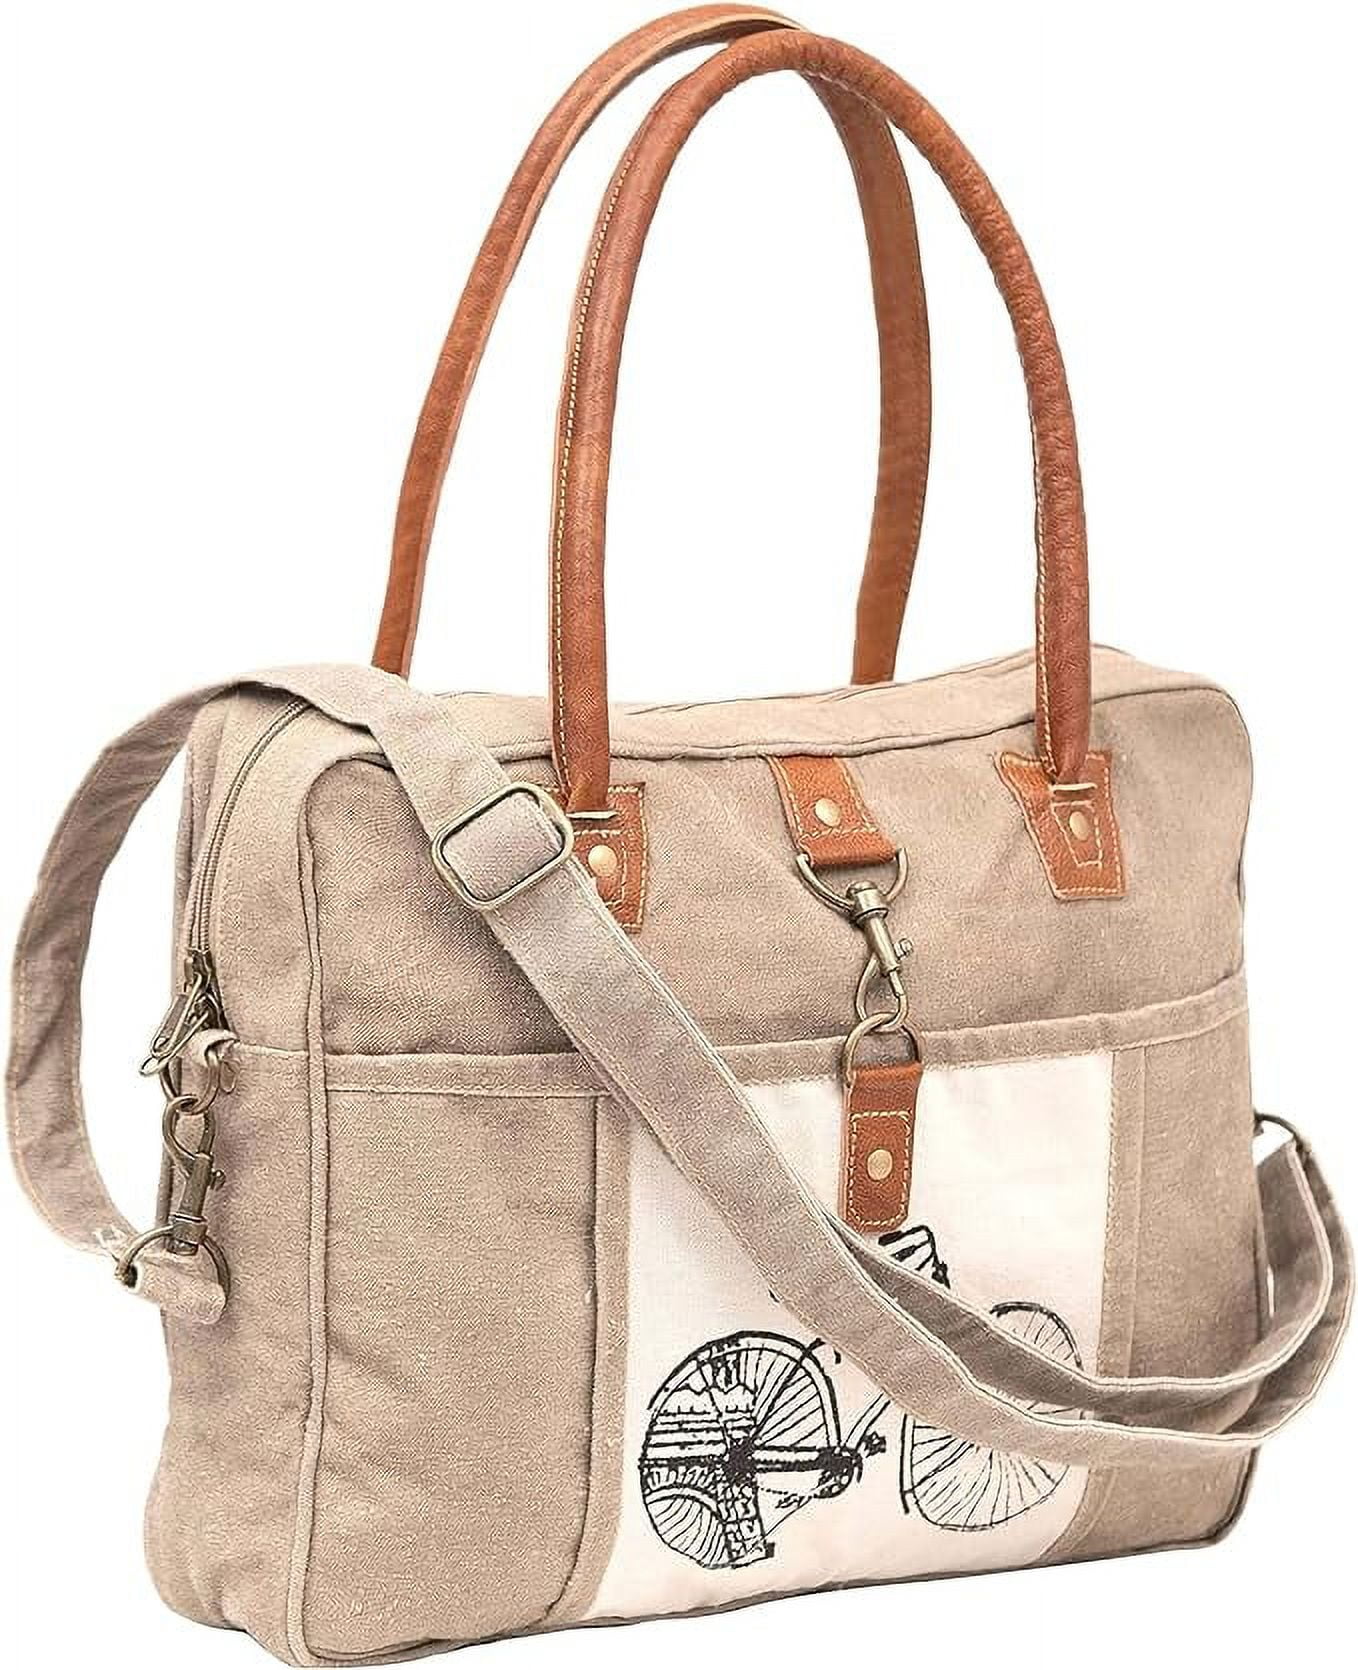 Westford Mill Cotton Recycled Stuff Bag (Natural) (M)